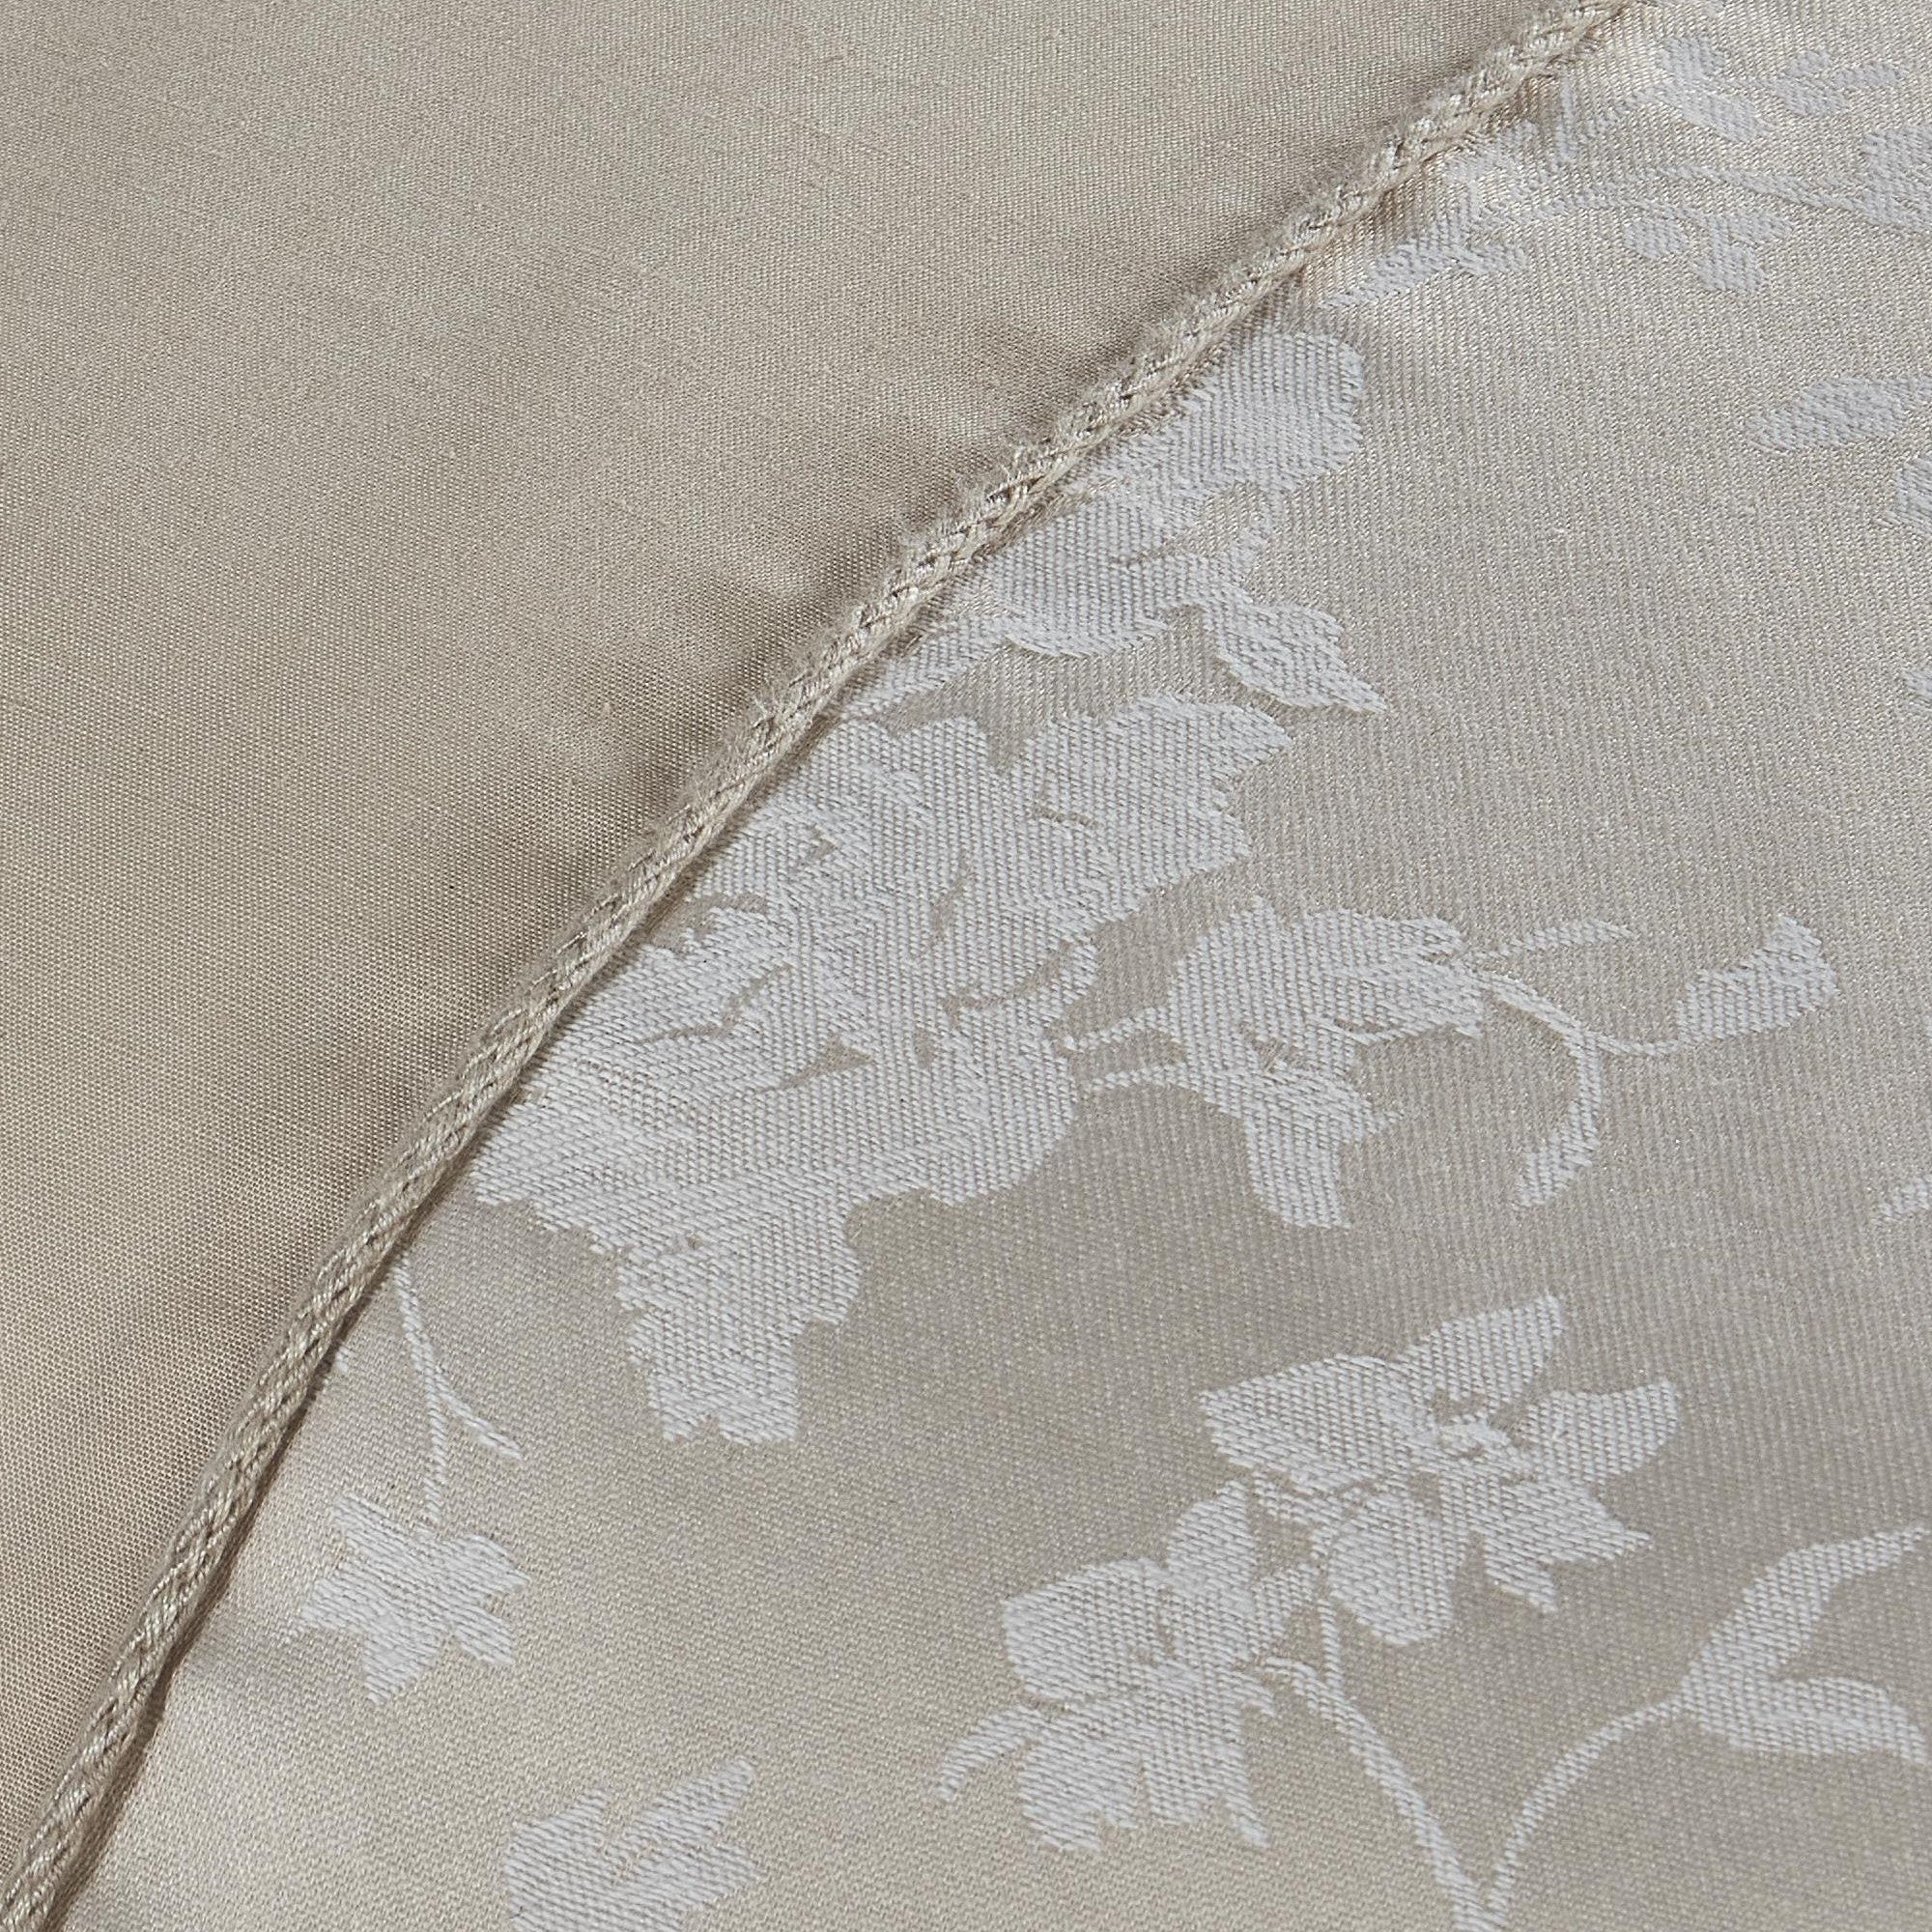 Duvet Cover Set Imelda by Dreams & Drapes Woven in Ivory